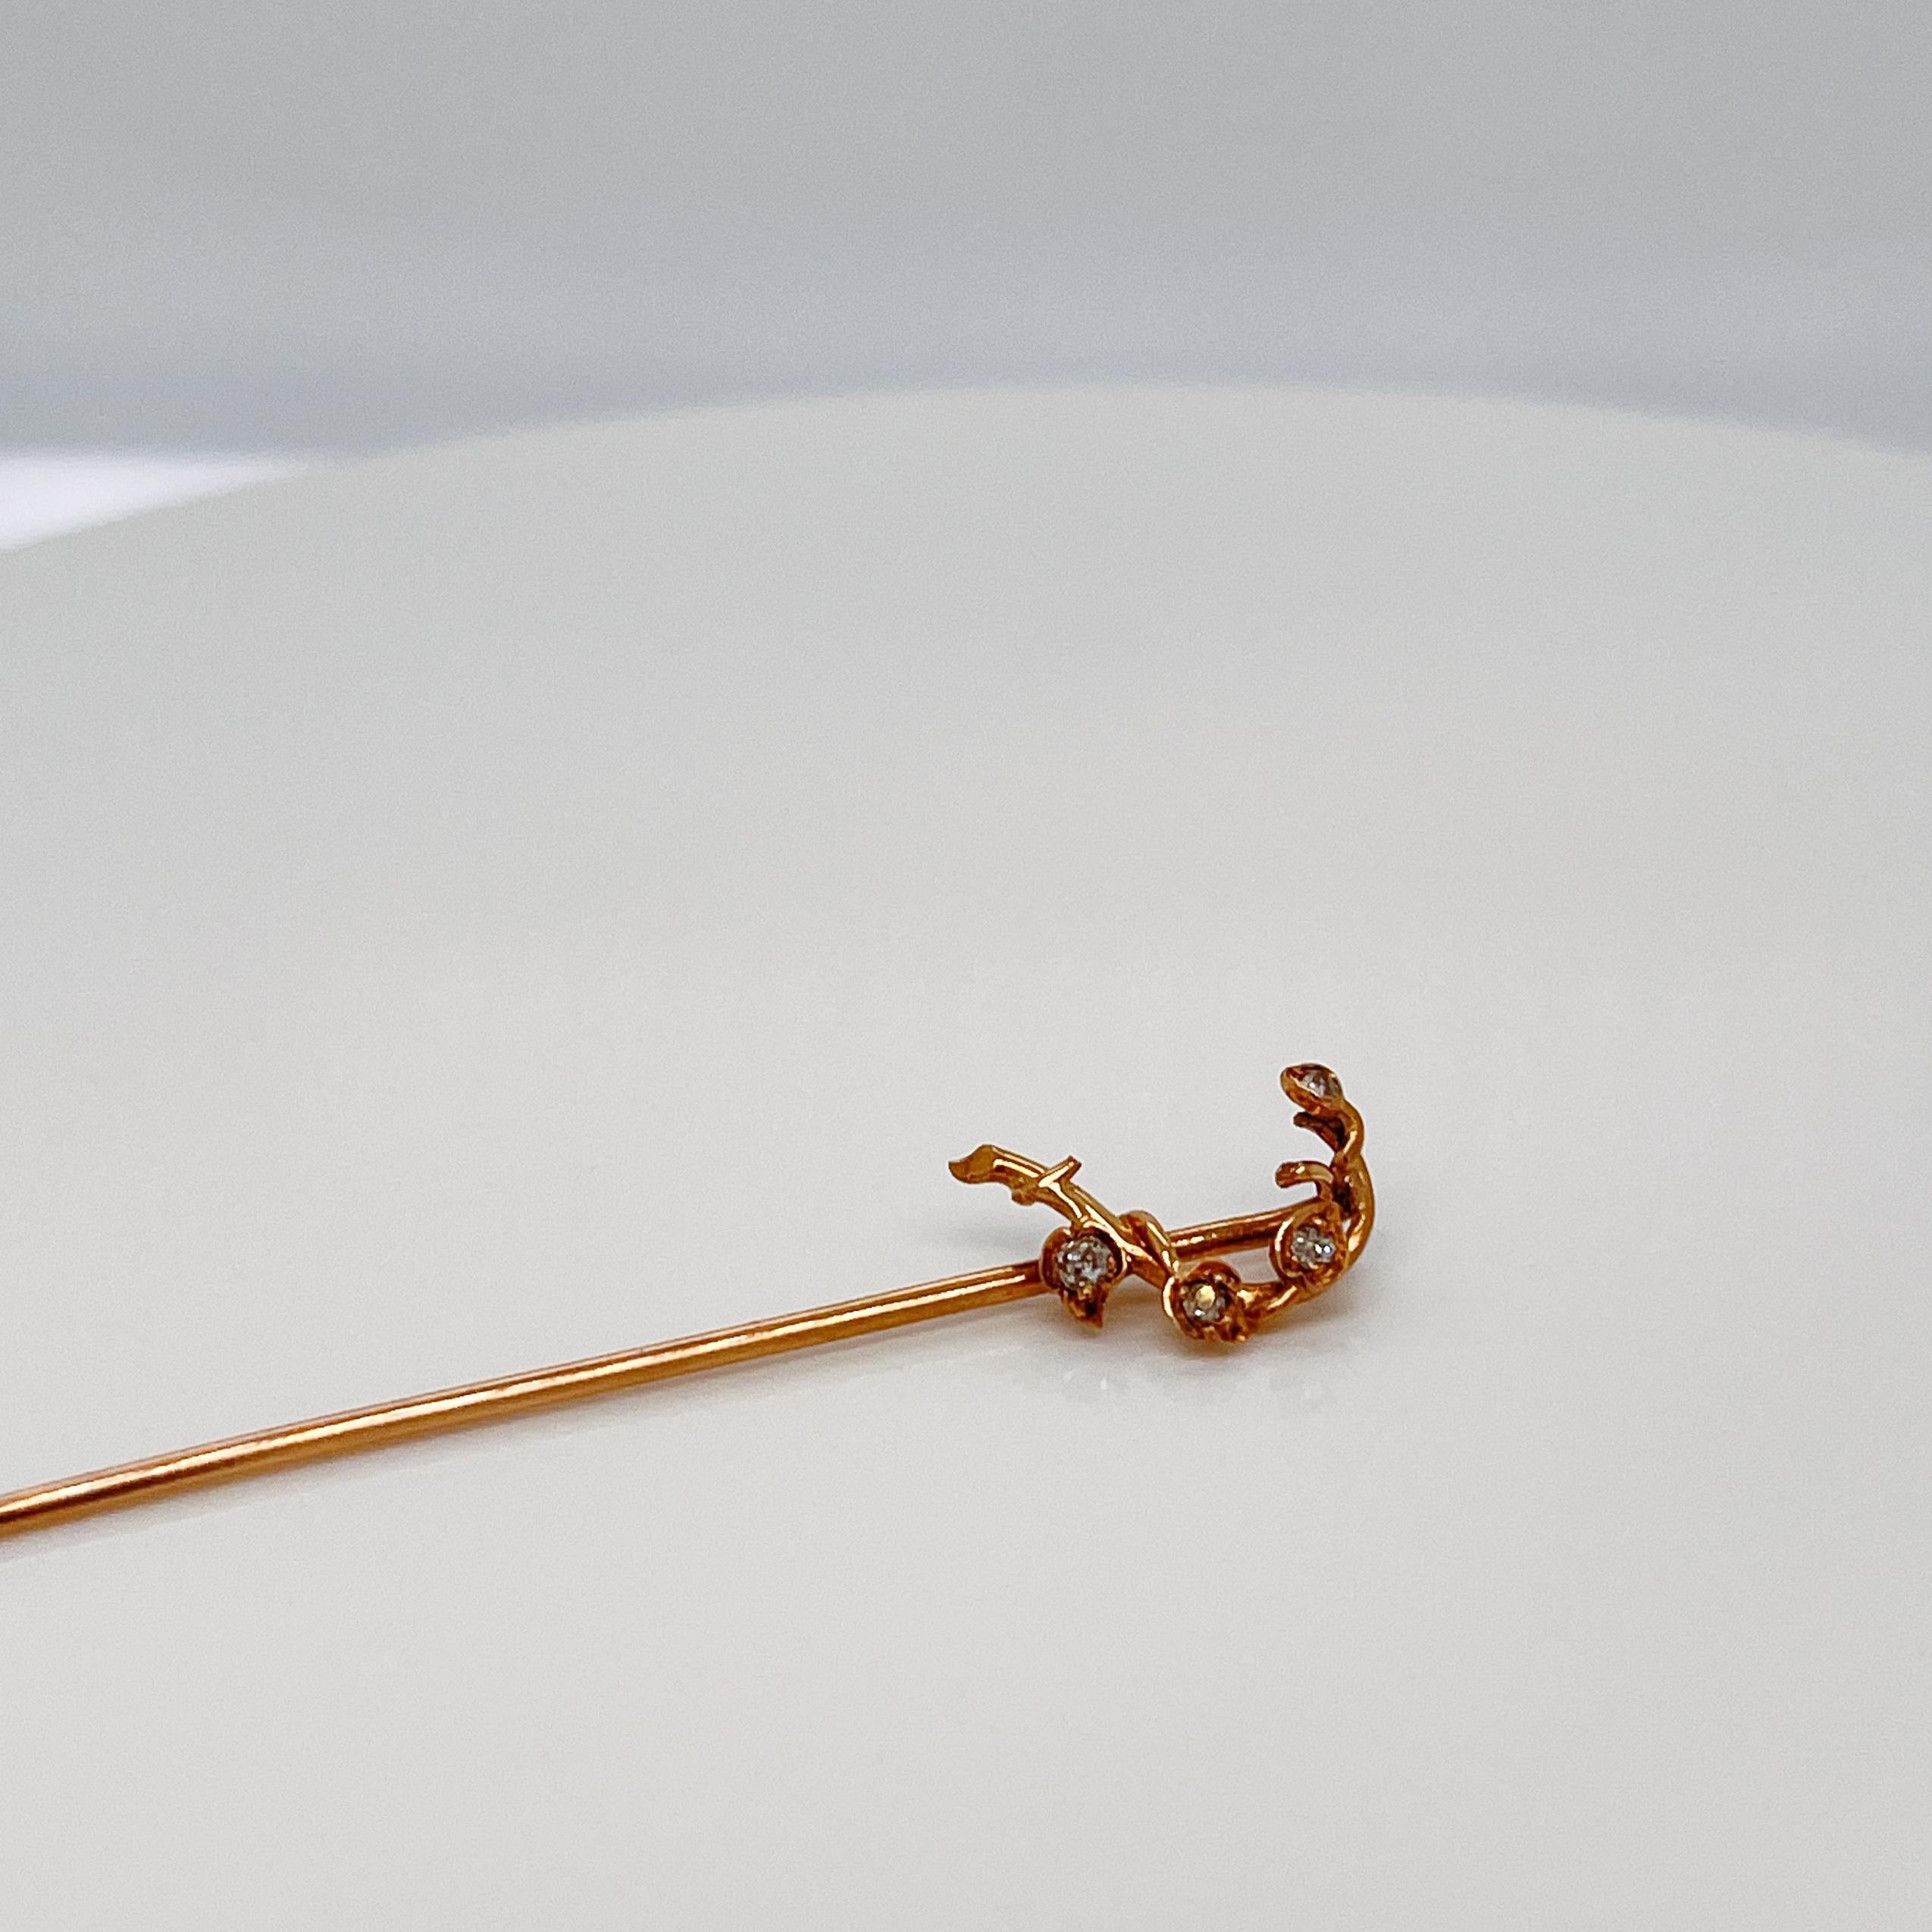 A very fine gold and diamond branch and vine stickpin.

With pave set diamonds in the of leaves of a vine that wraps around a 14k gold branch.

Simply a great stickpin!

Date:
19th Century

Overall Condition:
It is in overall good, as-pictured, used